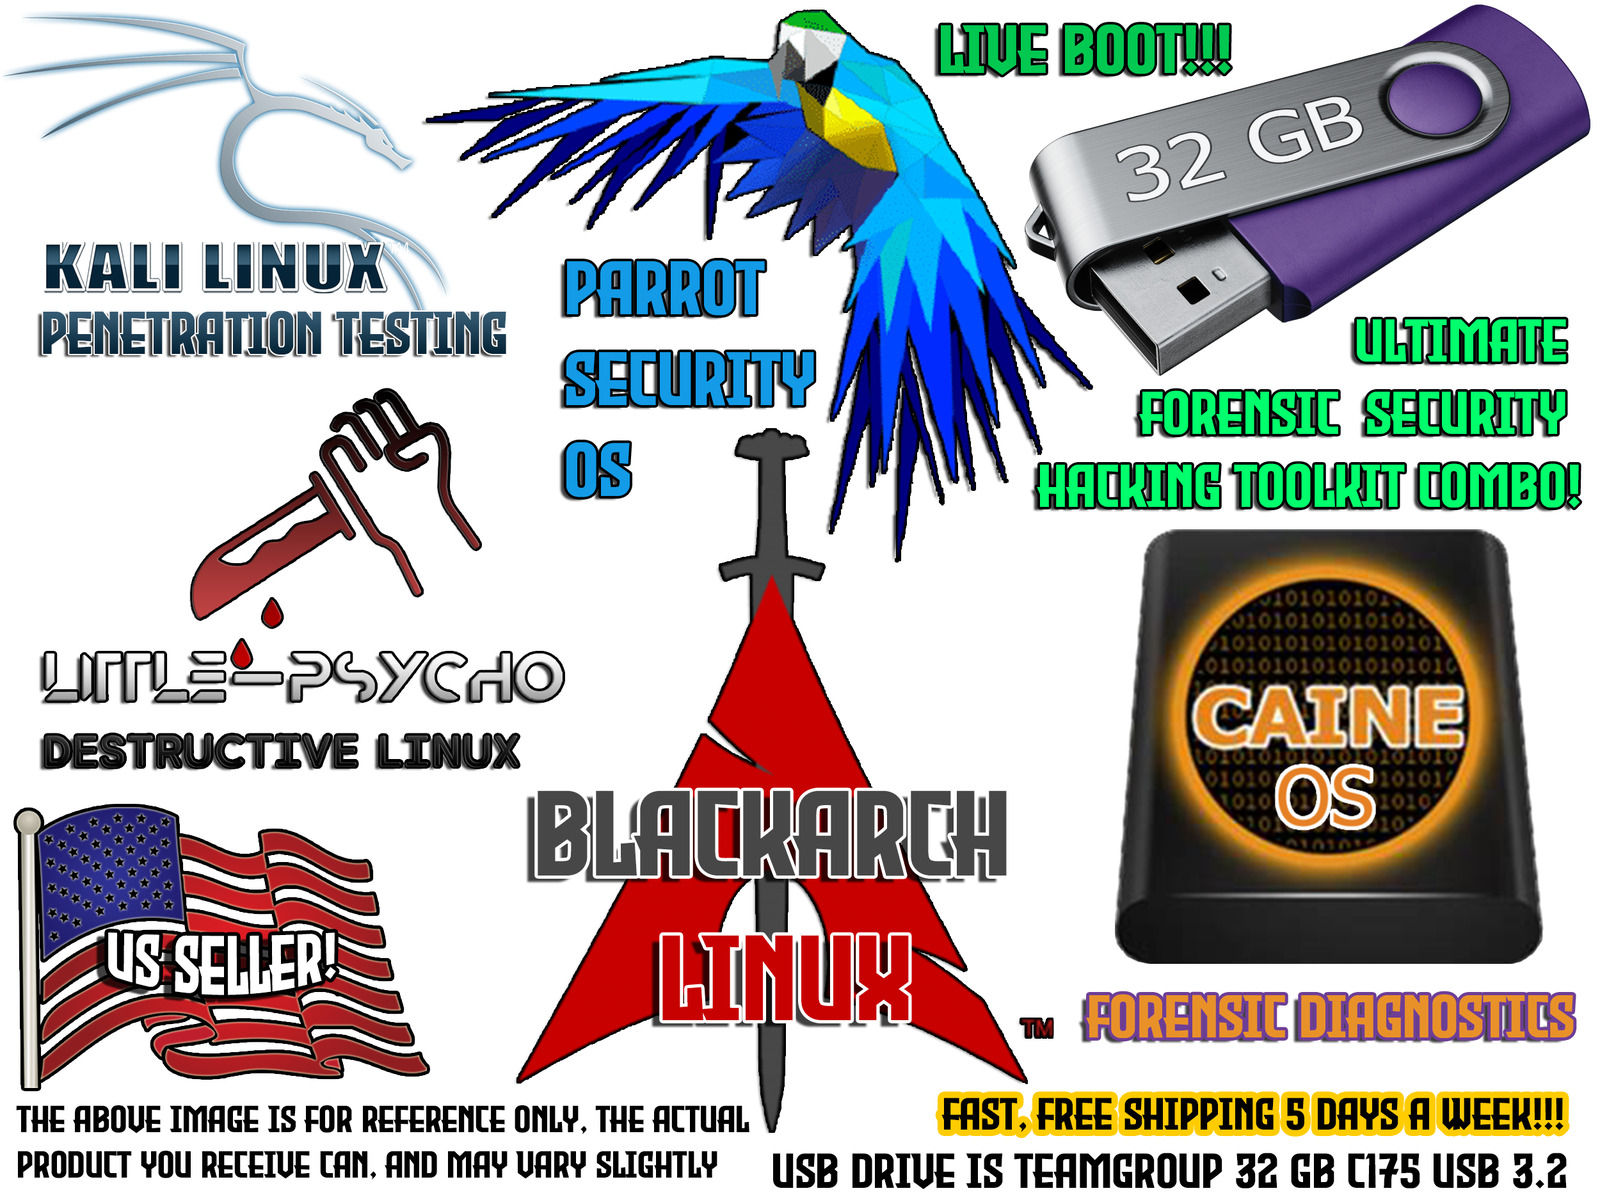 BlackArch CAINE Parrot Little Psycho Kali Forensic Security Toolkit 32 gb USB